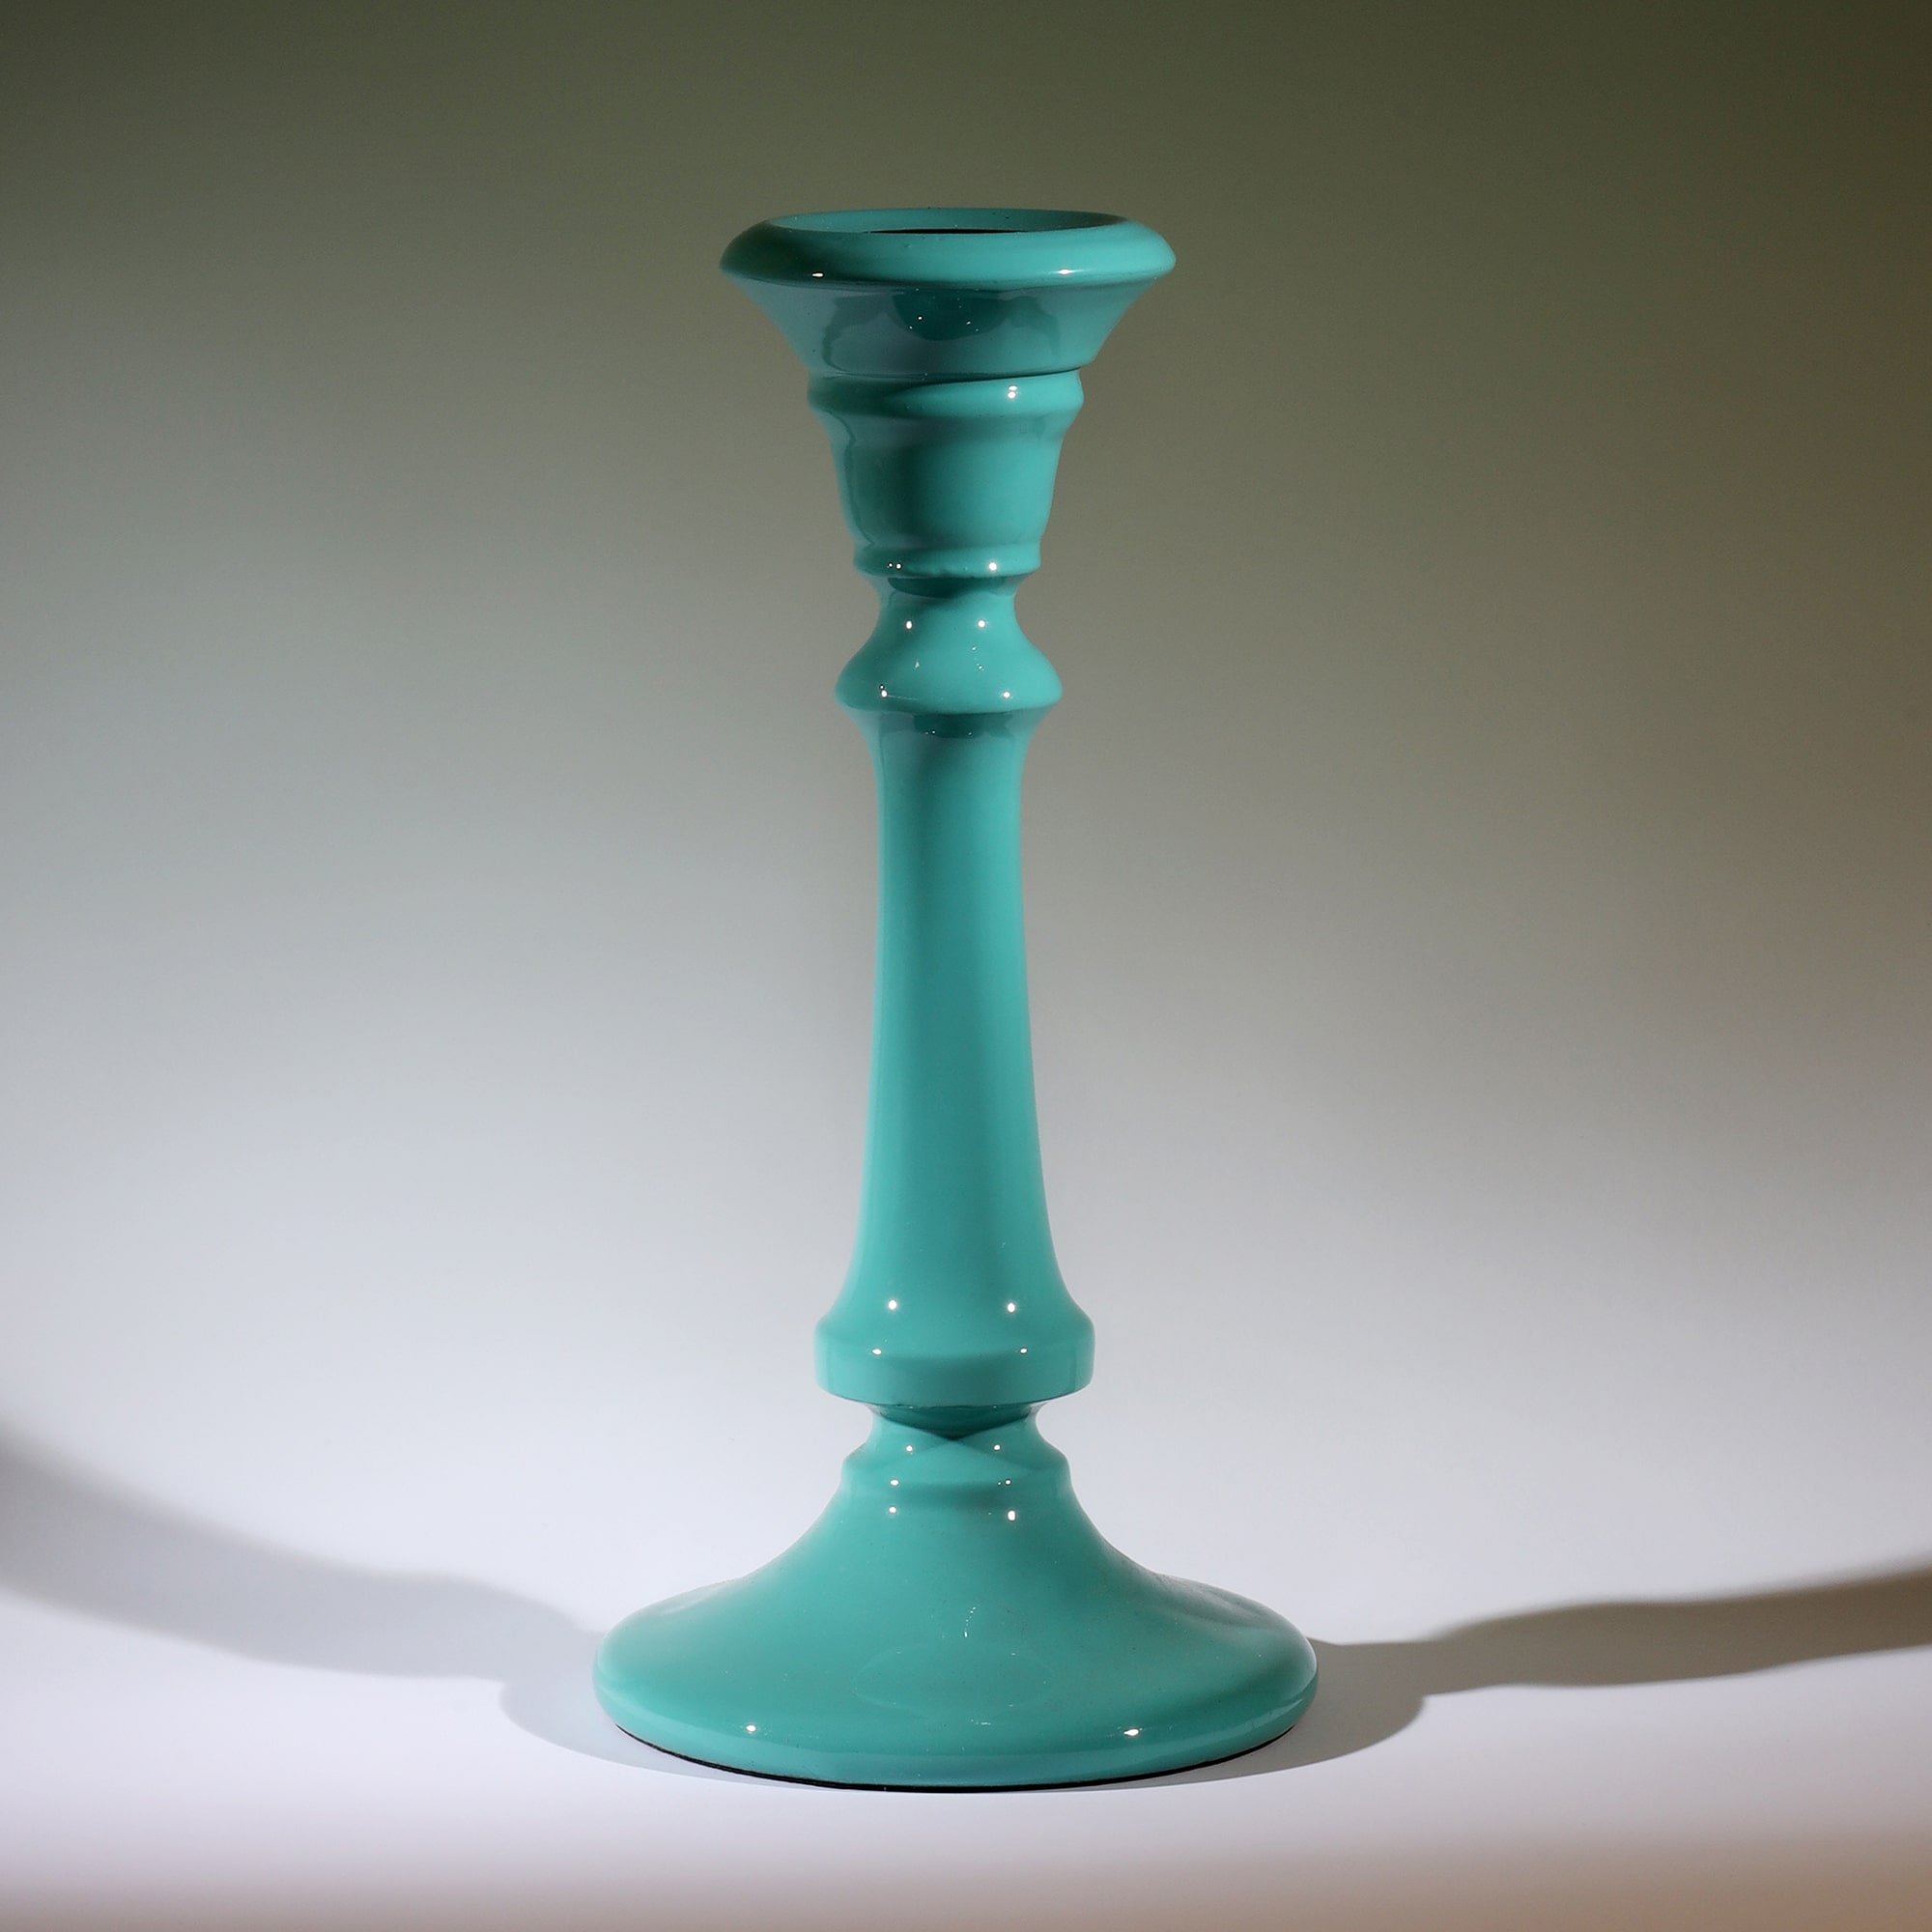 Turquoise Polished Lacquer Candle holder,tapered at the top,moving down it has various section and a long smooth piece to finish with a tapered base